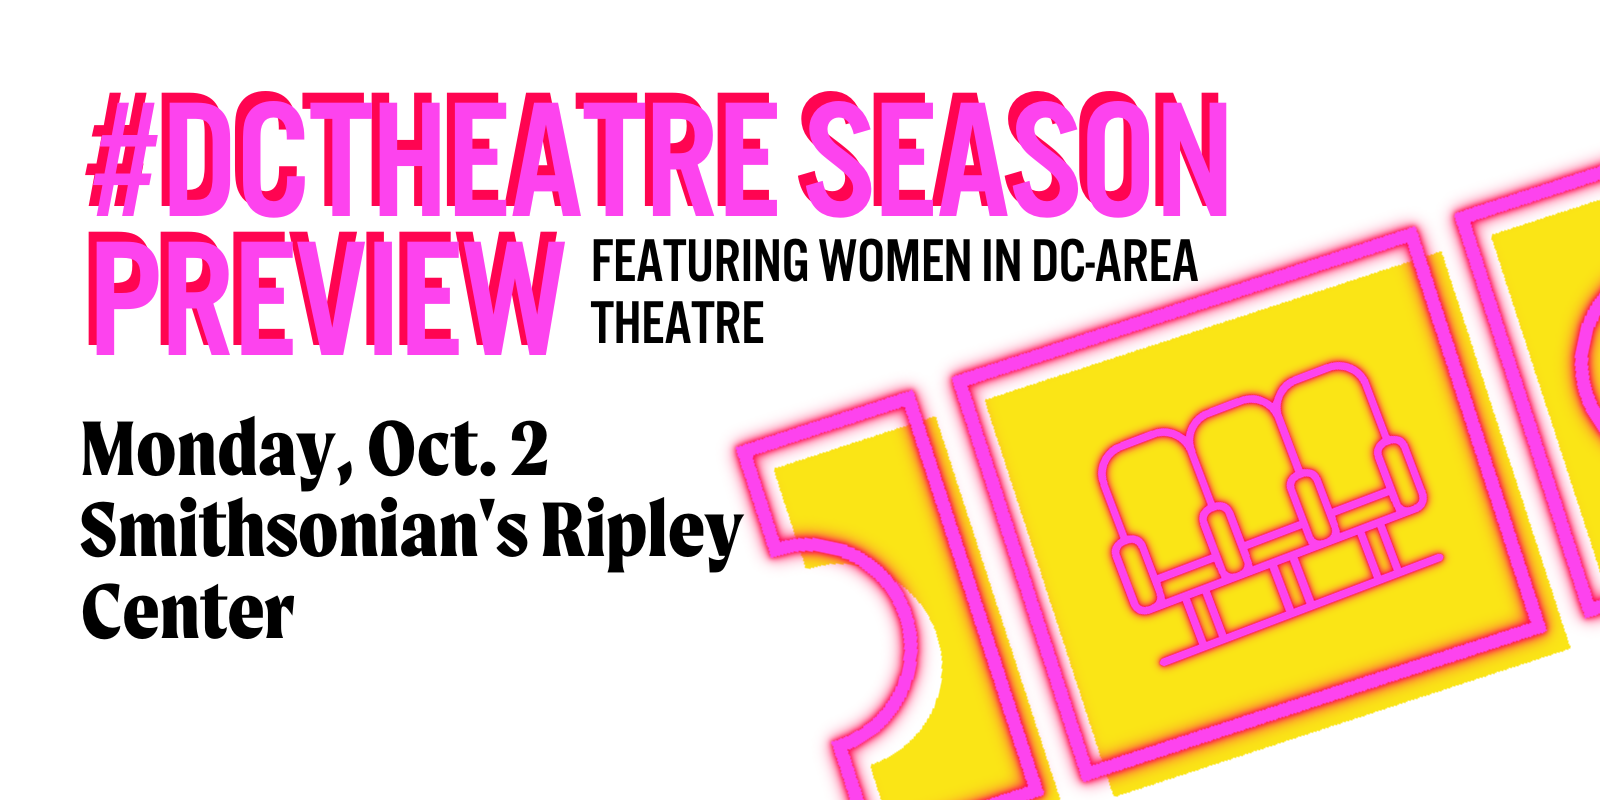 #DCTheatre Season Preview Featuring Women in DC-Area Theatre